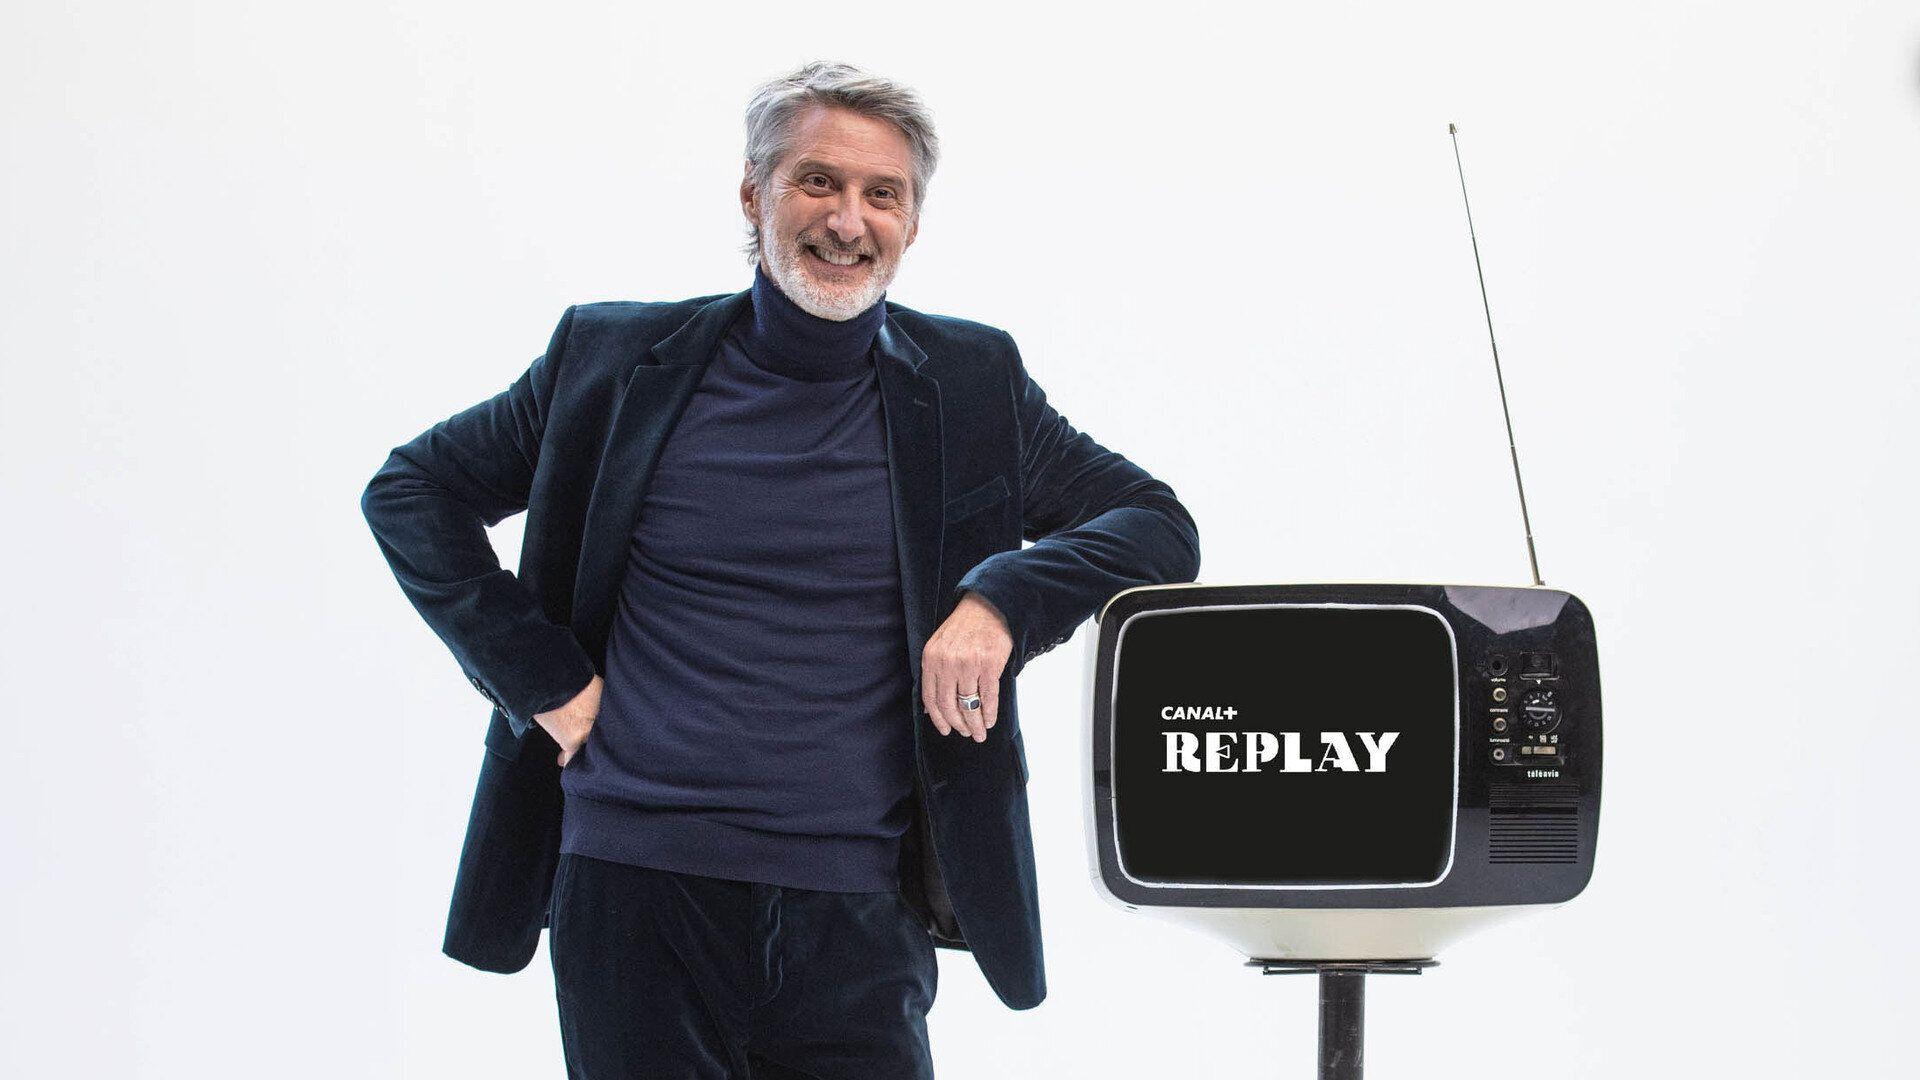 Replay (Canal+)